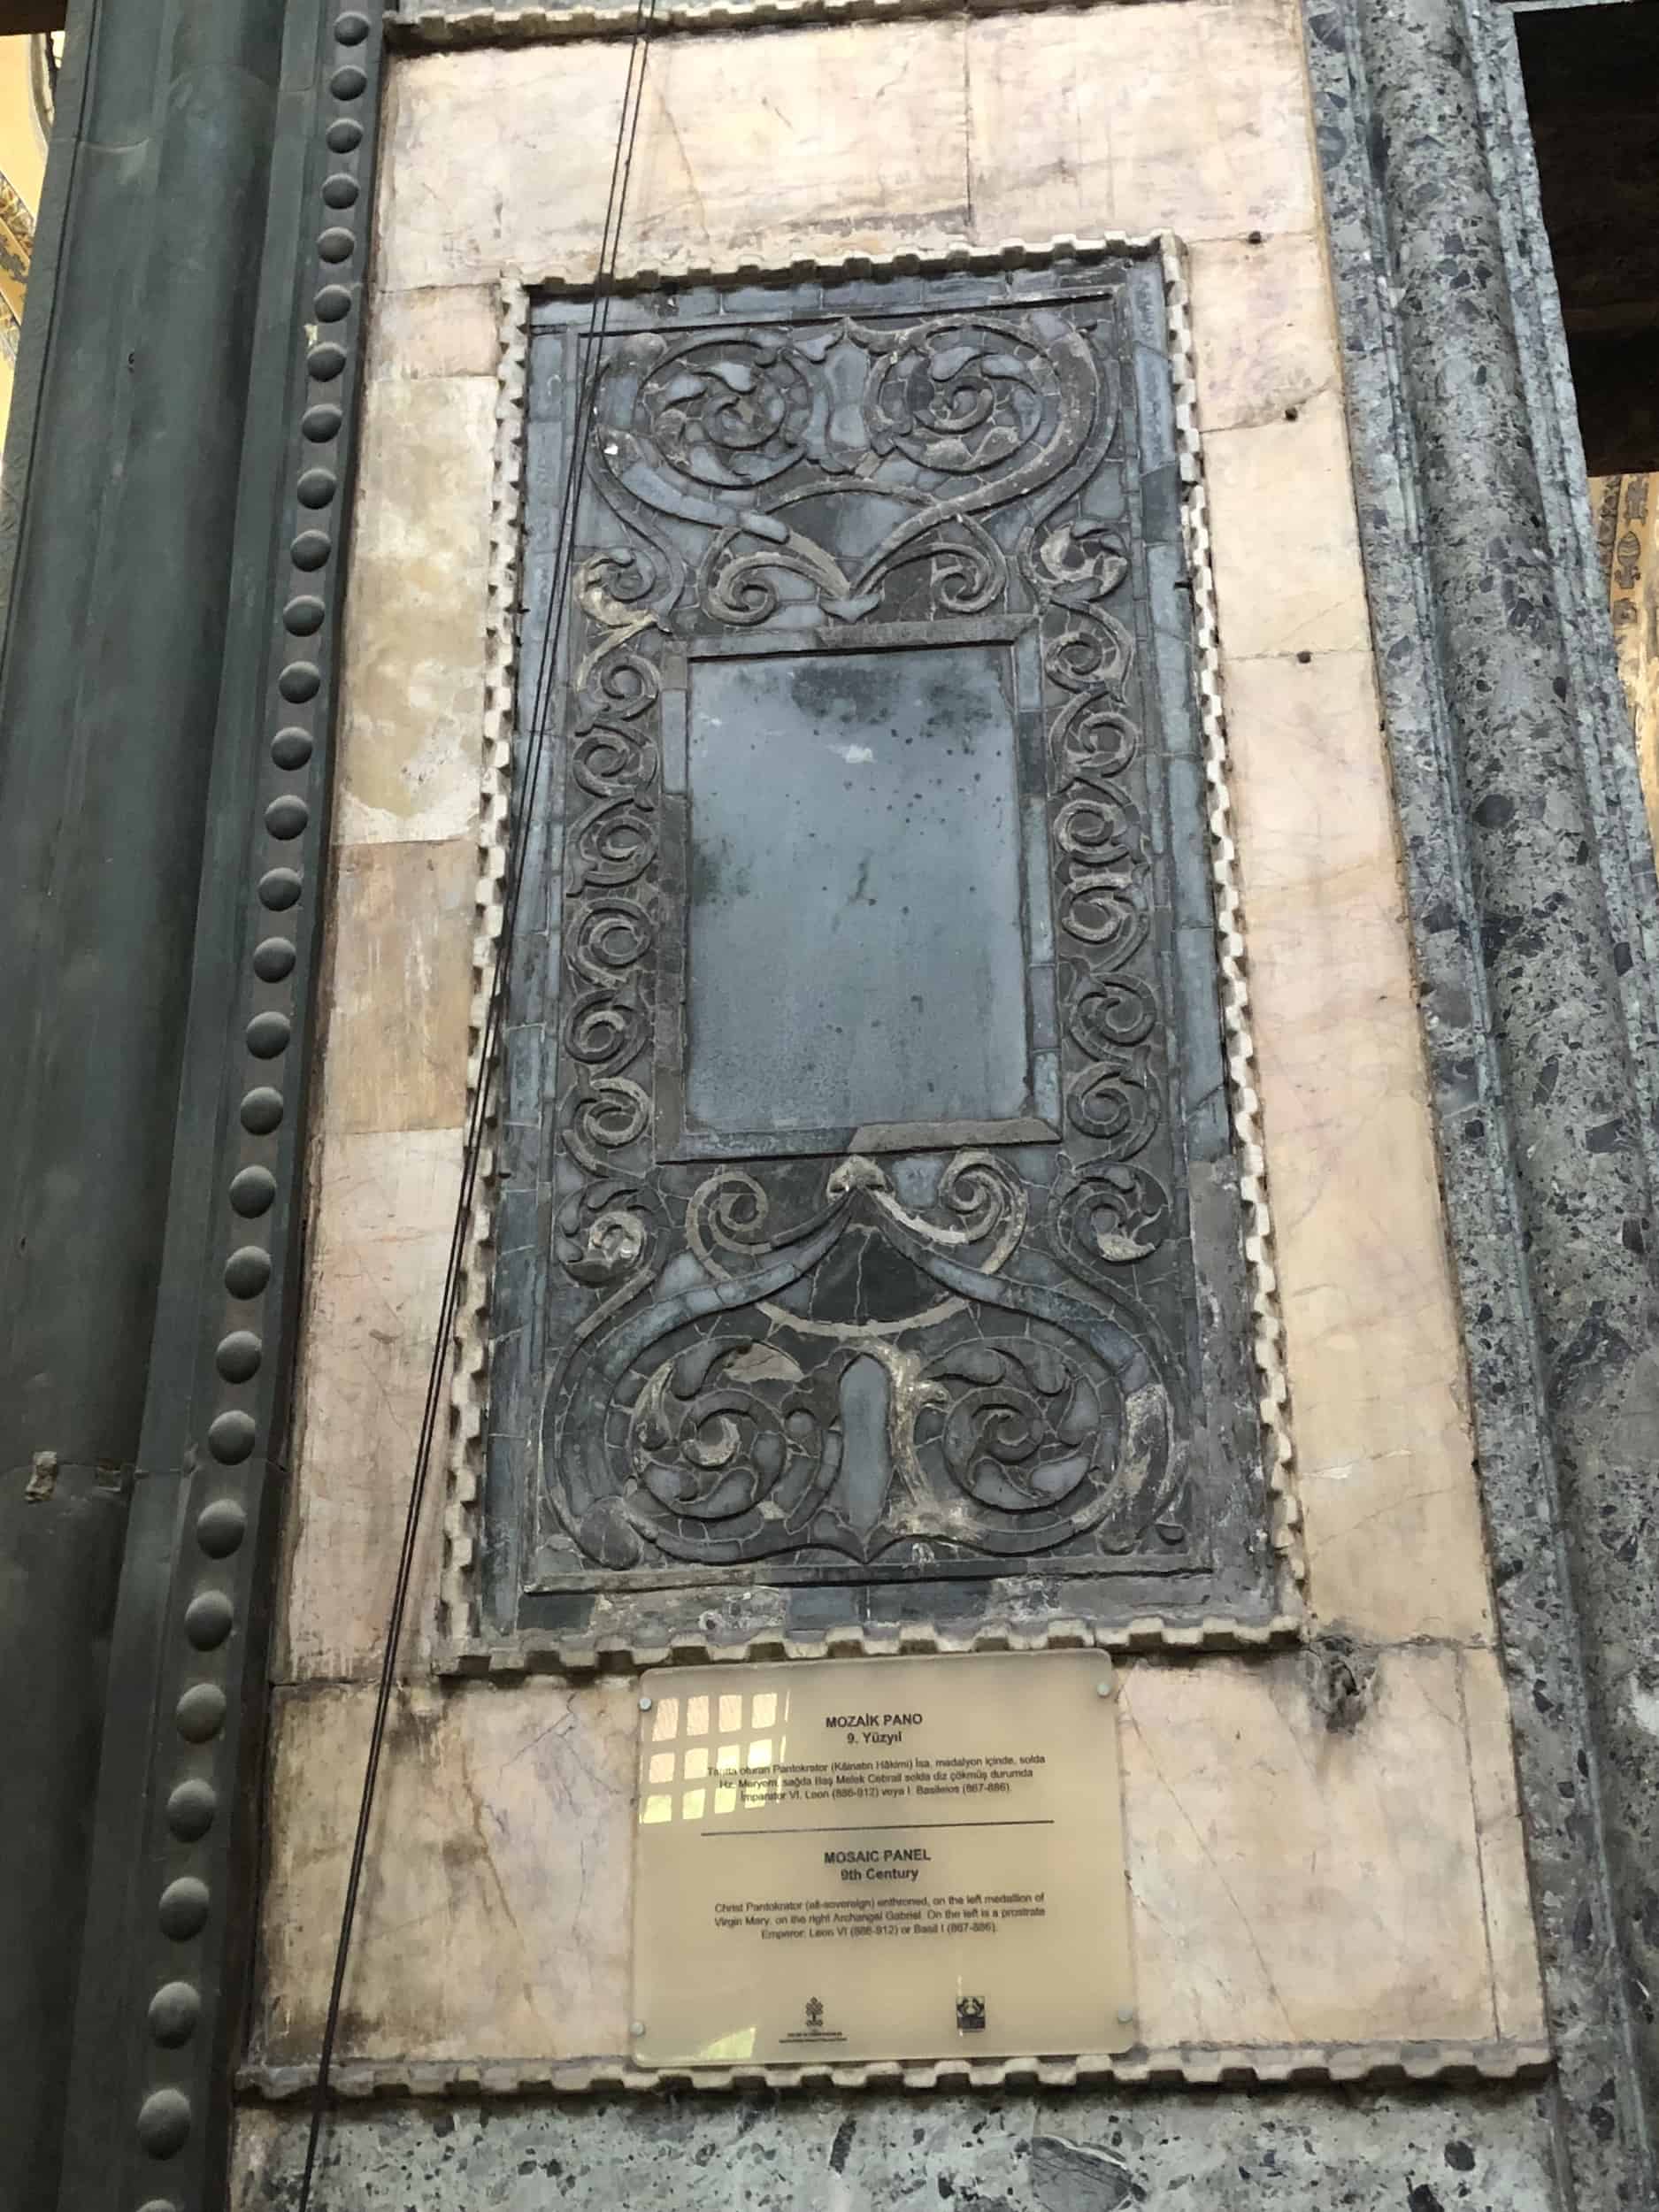 Marble panel with decoration in the inner narthex of Hagia Sophia in Istanbul, Turkey